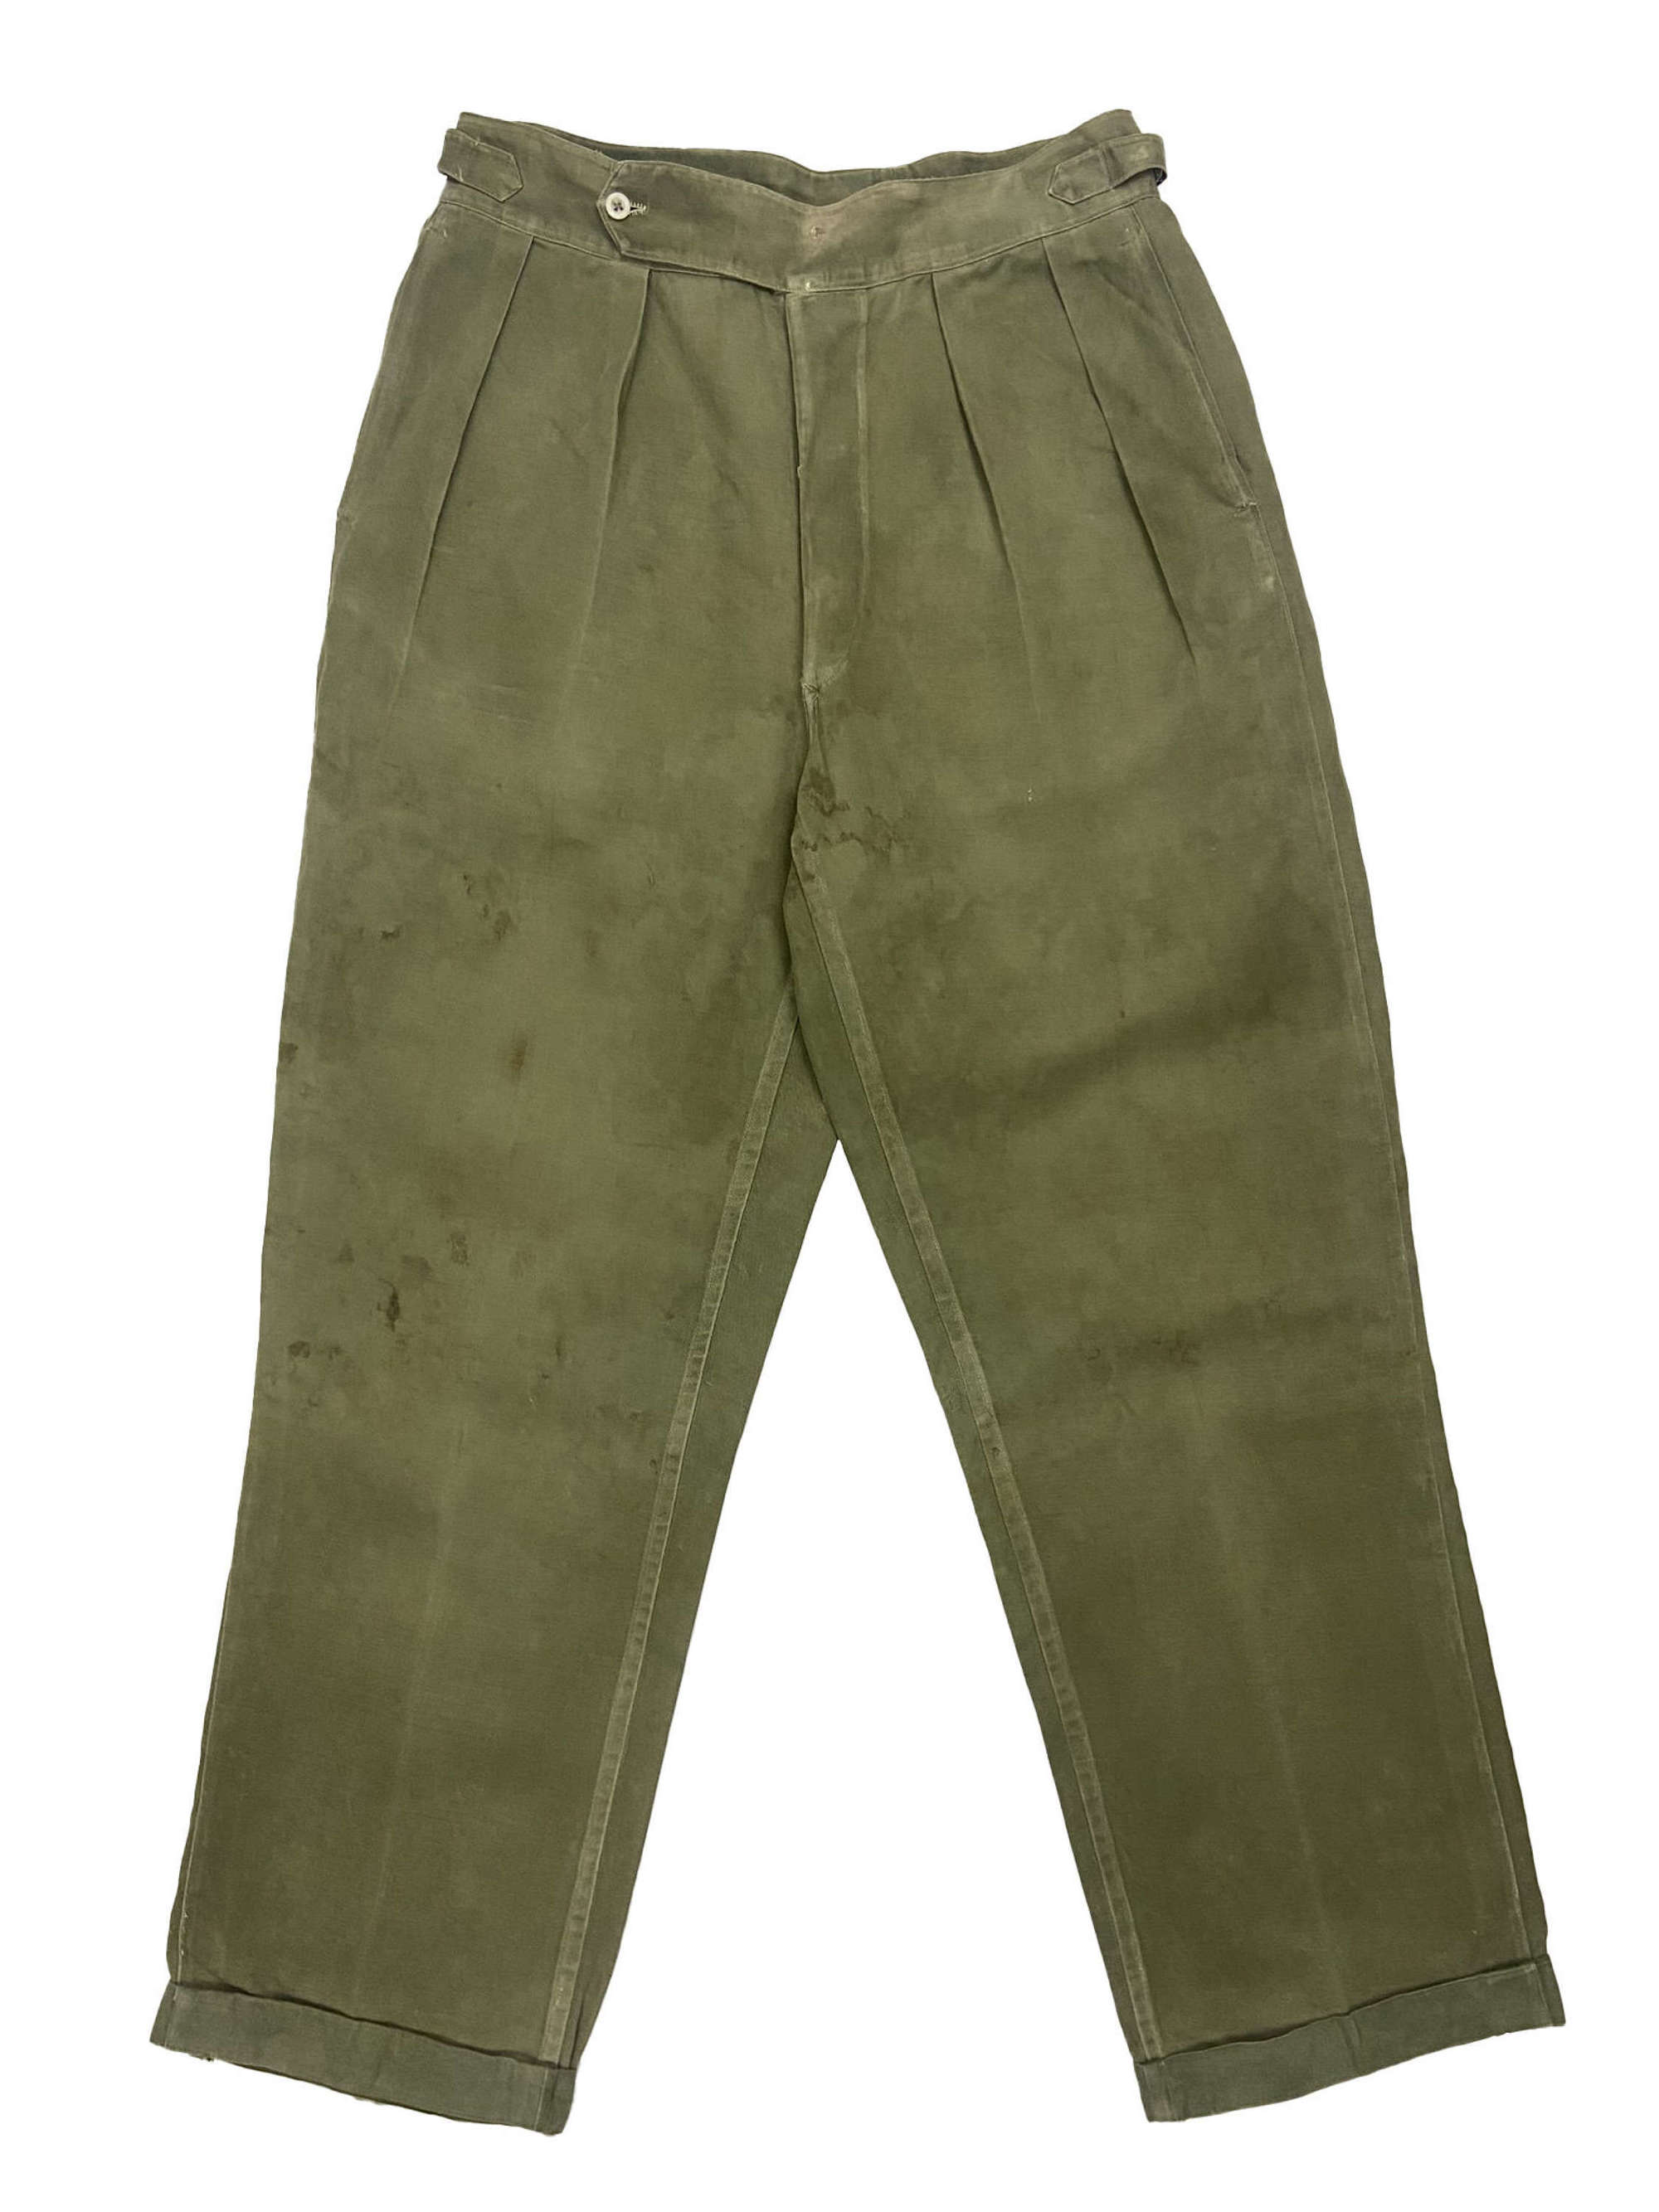 Original Early 1950s Theatre Made British Jungle Green Trousers